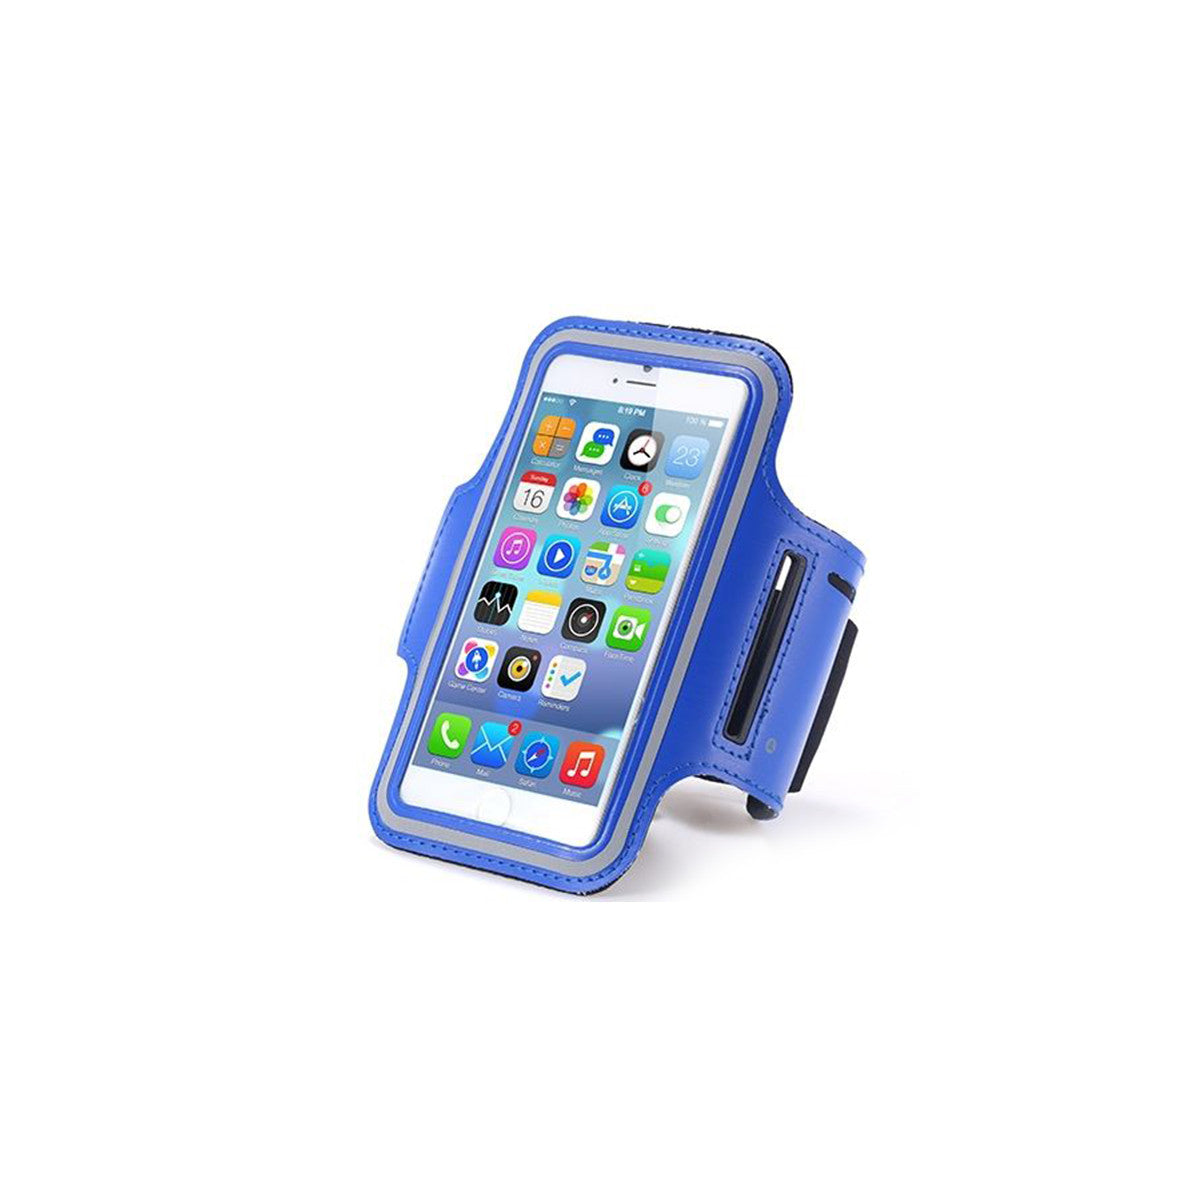 Gym Running Armband For Apple iPhone 5 6 7 & Plus iPhone 5/5S/5C/SE Blue 